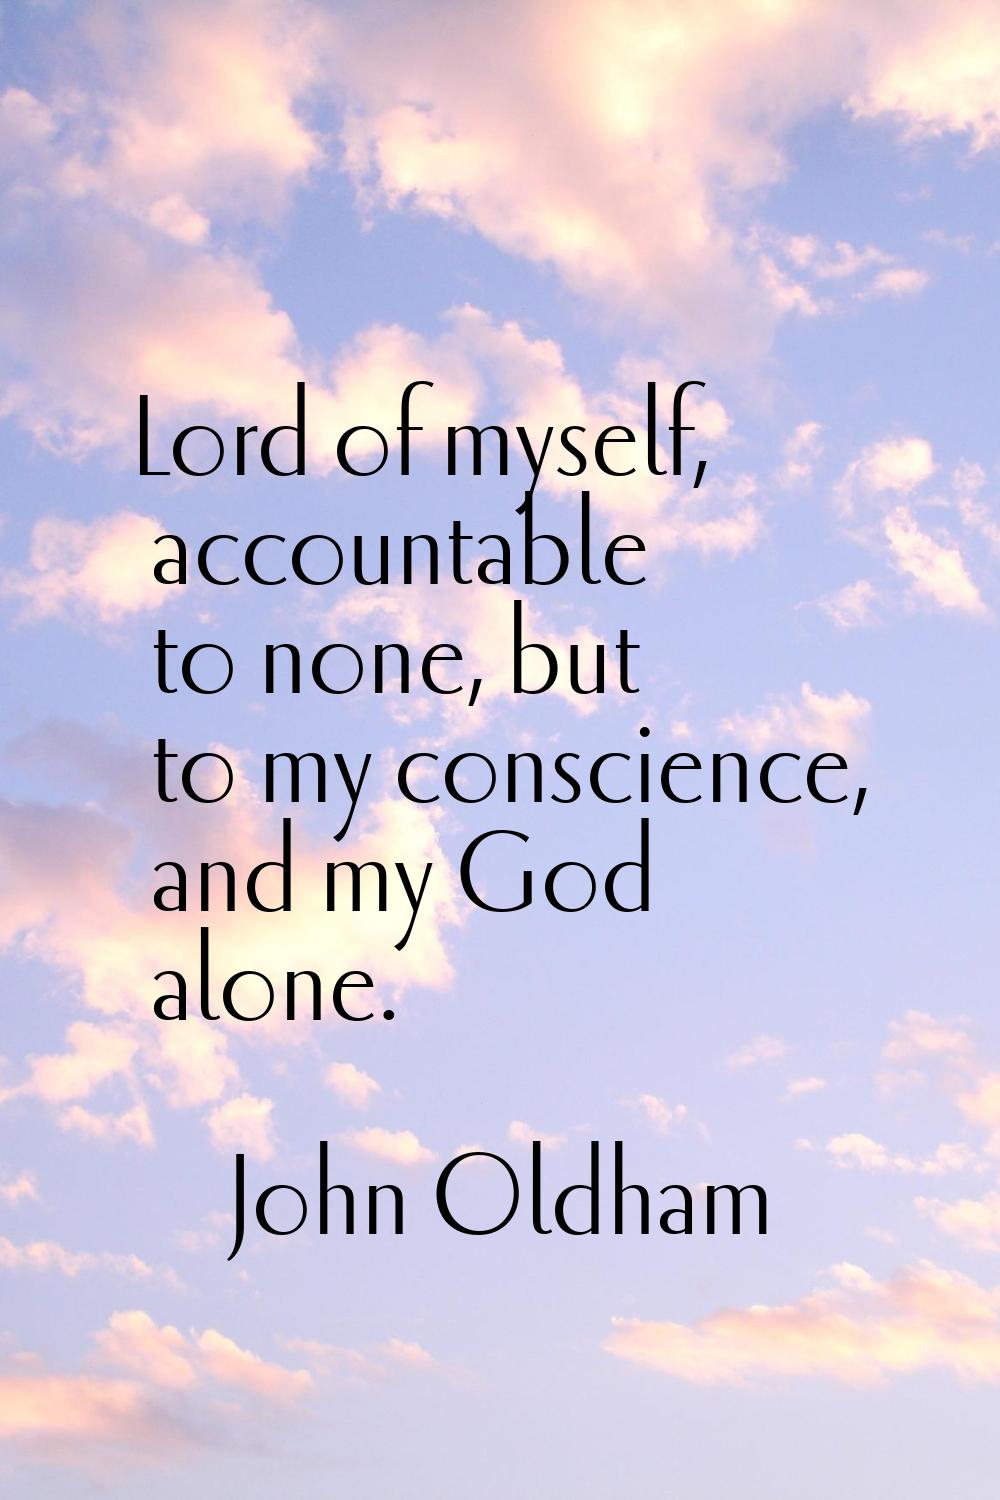 Lord of myself, accountable to none, but to my conscience, and my God alone.